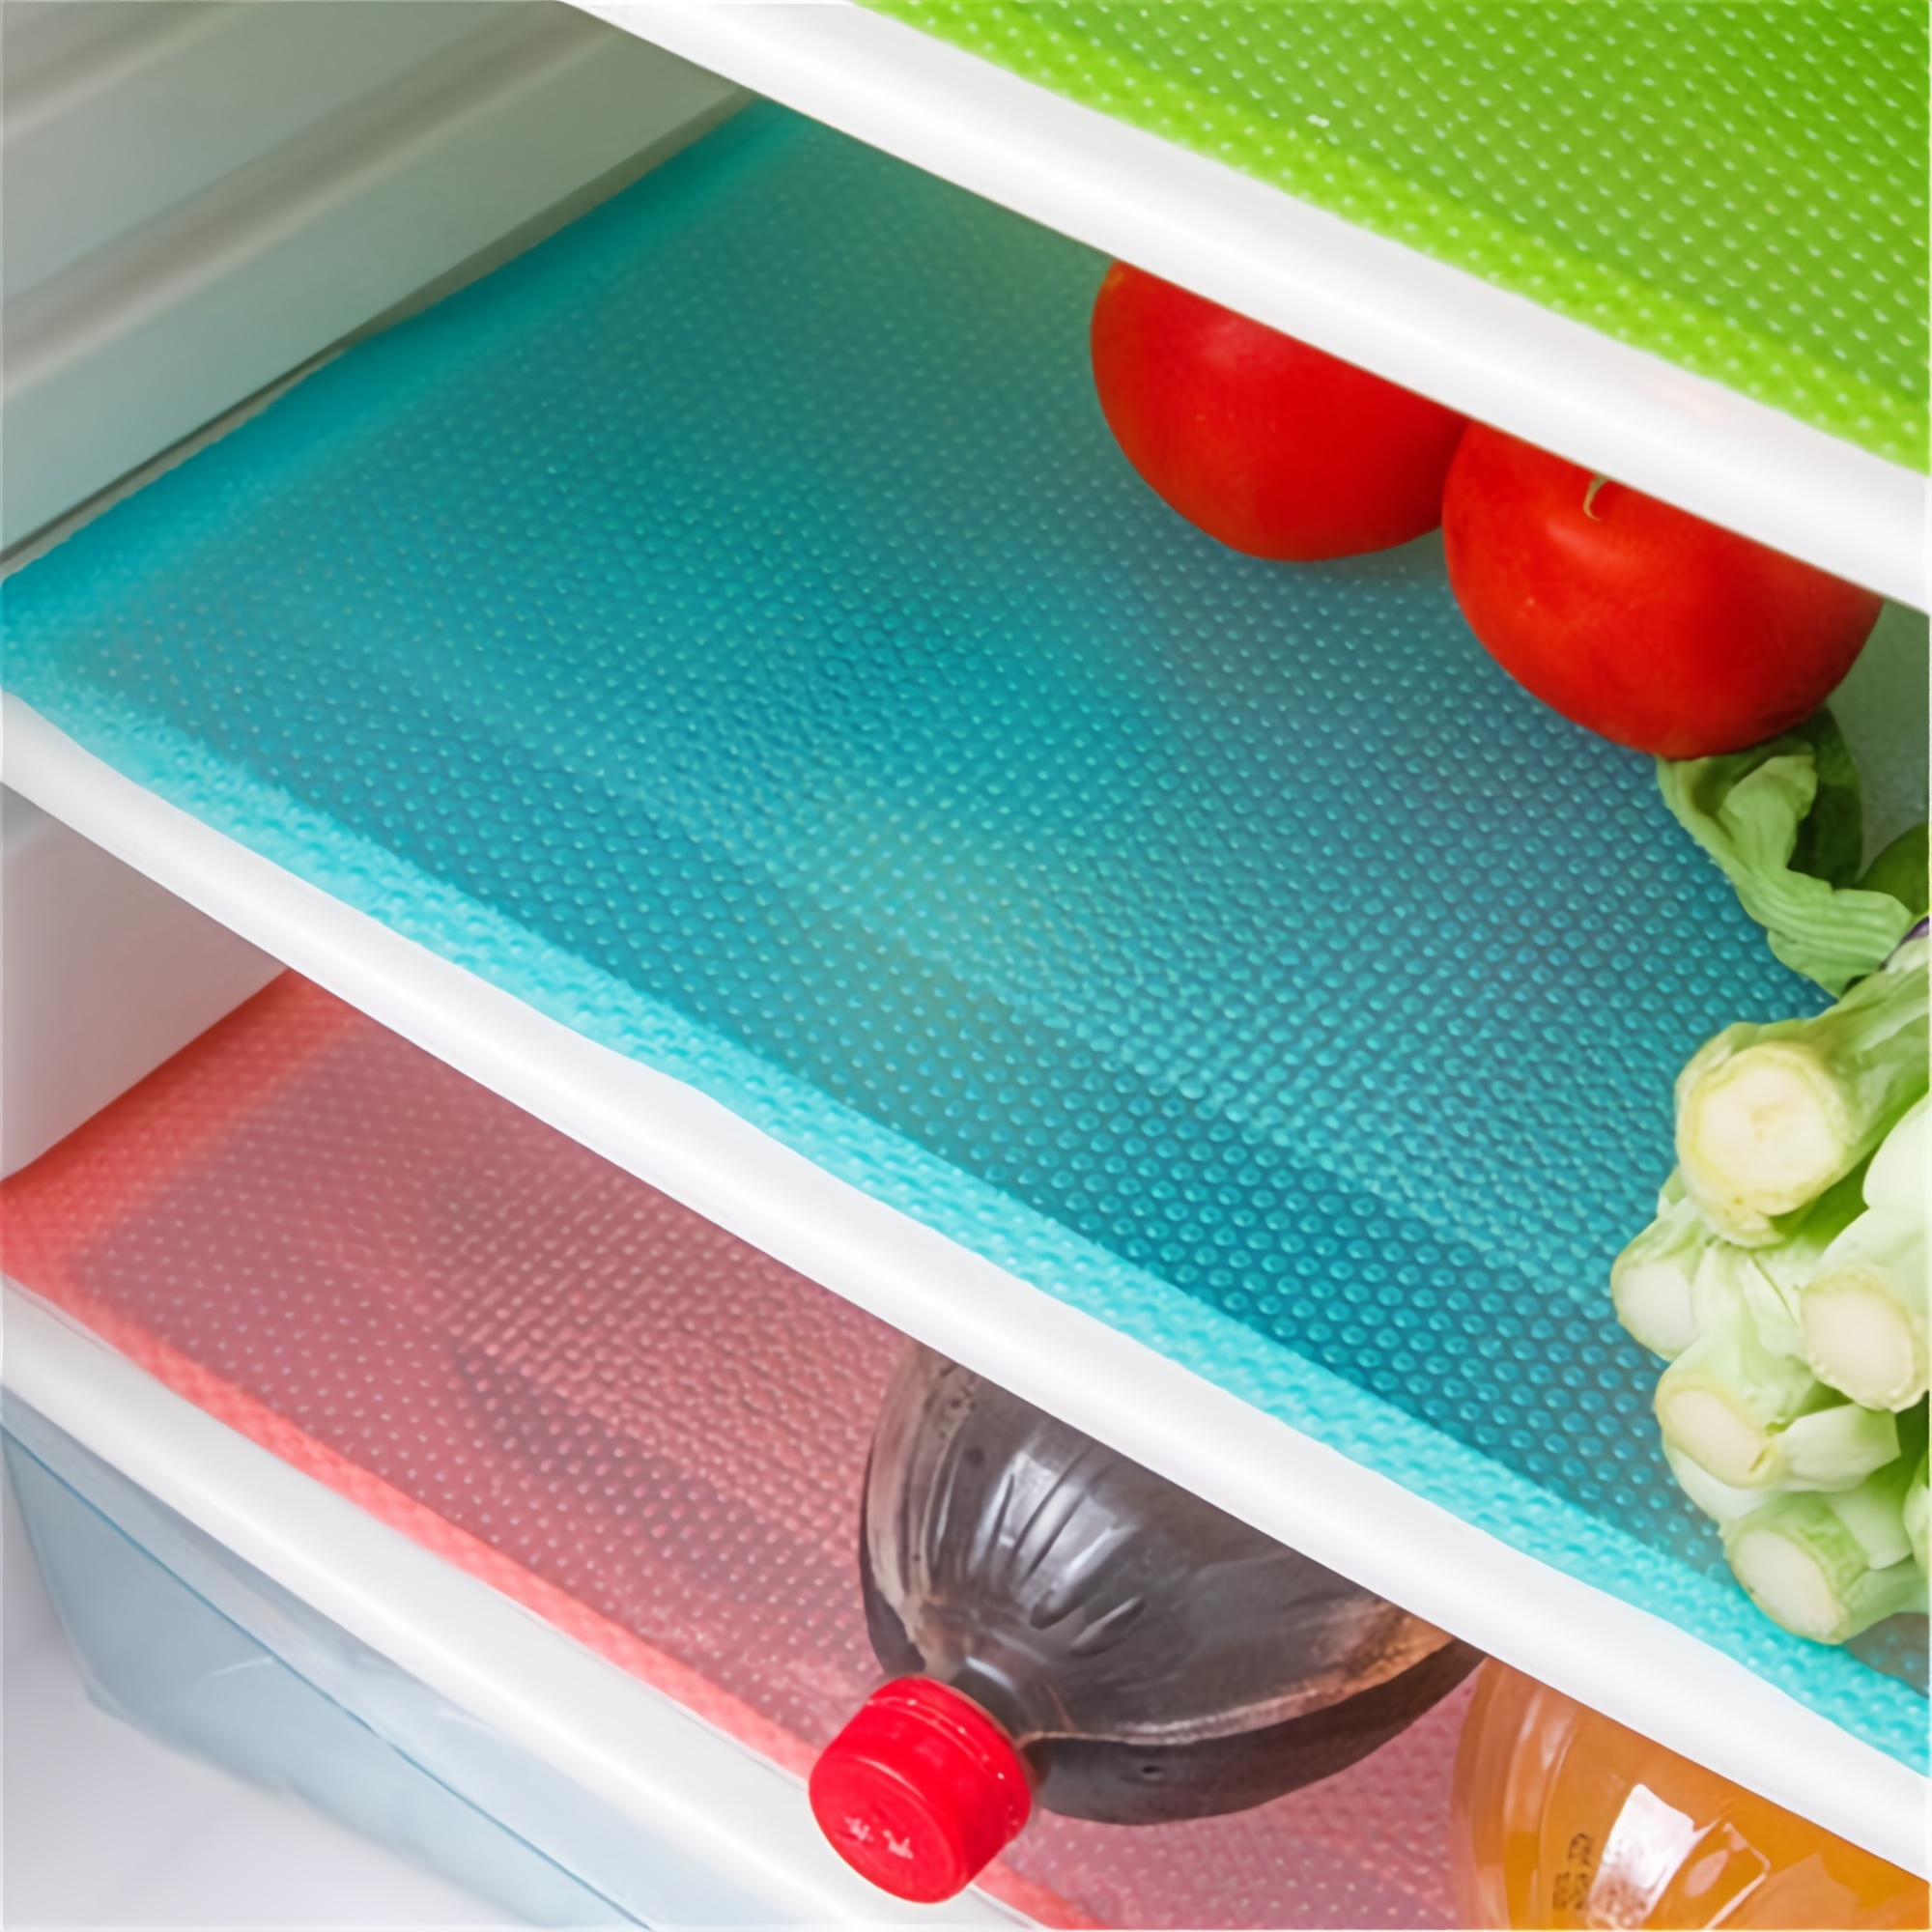 Black Shelf Liners for Kitchen Cabinets Non-Adhesive, Non-Slip Drawer Liner, Waterproof Refrigerator Liners, Fridge Liners and Mats Washable Plastic